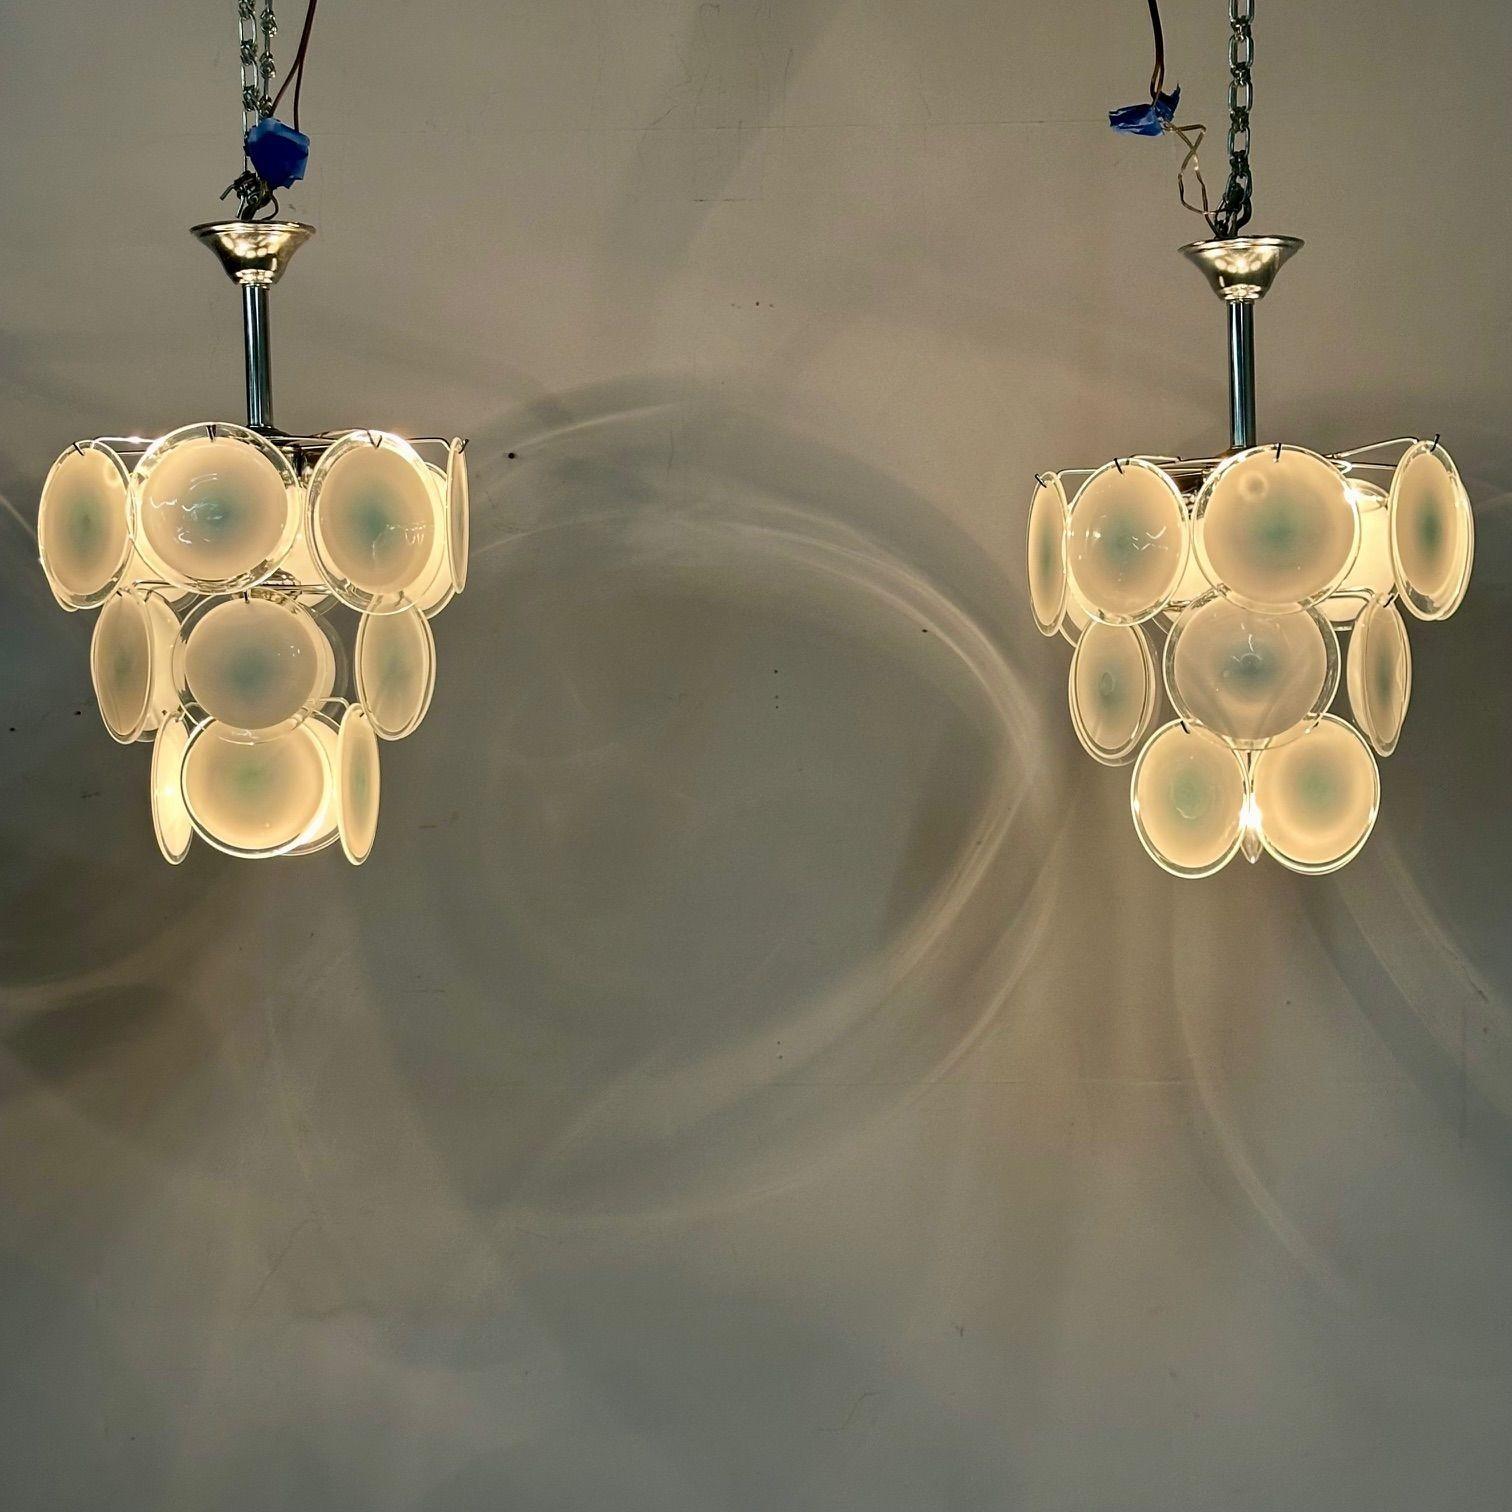 Mid-Century Modern Style Small White Murano Glass Disk Chandeliers / Pendants In Good Condition For Sale In Stamford, CT